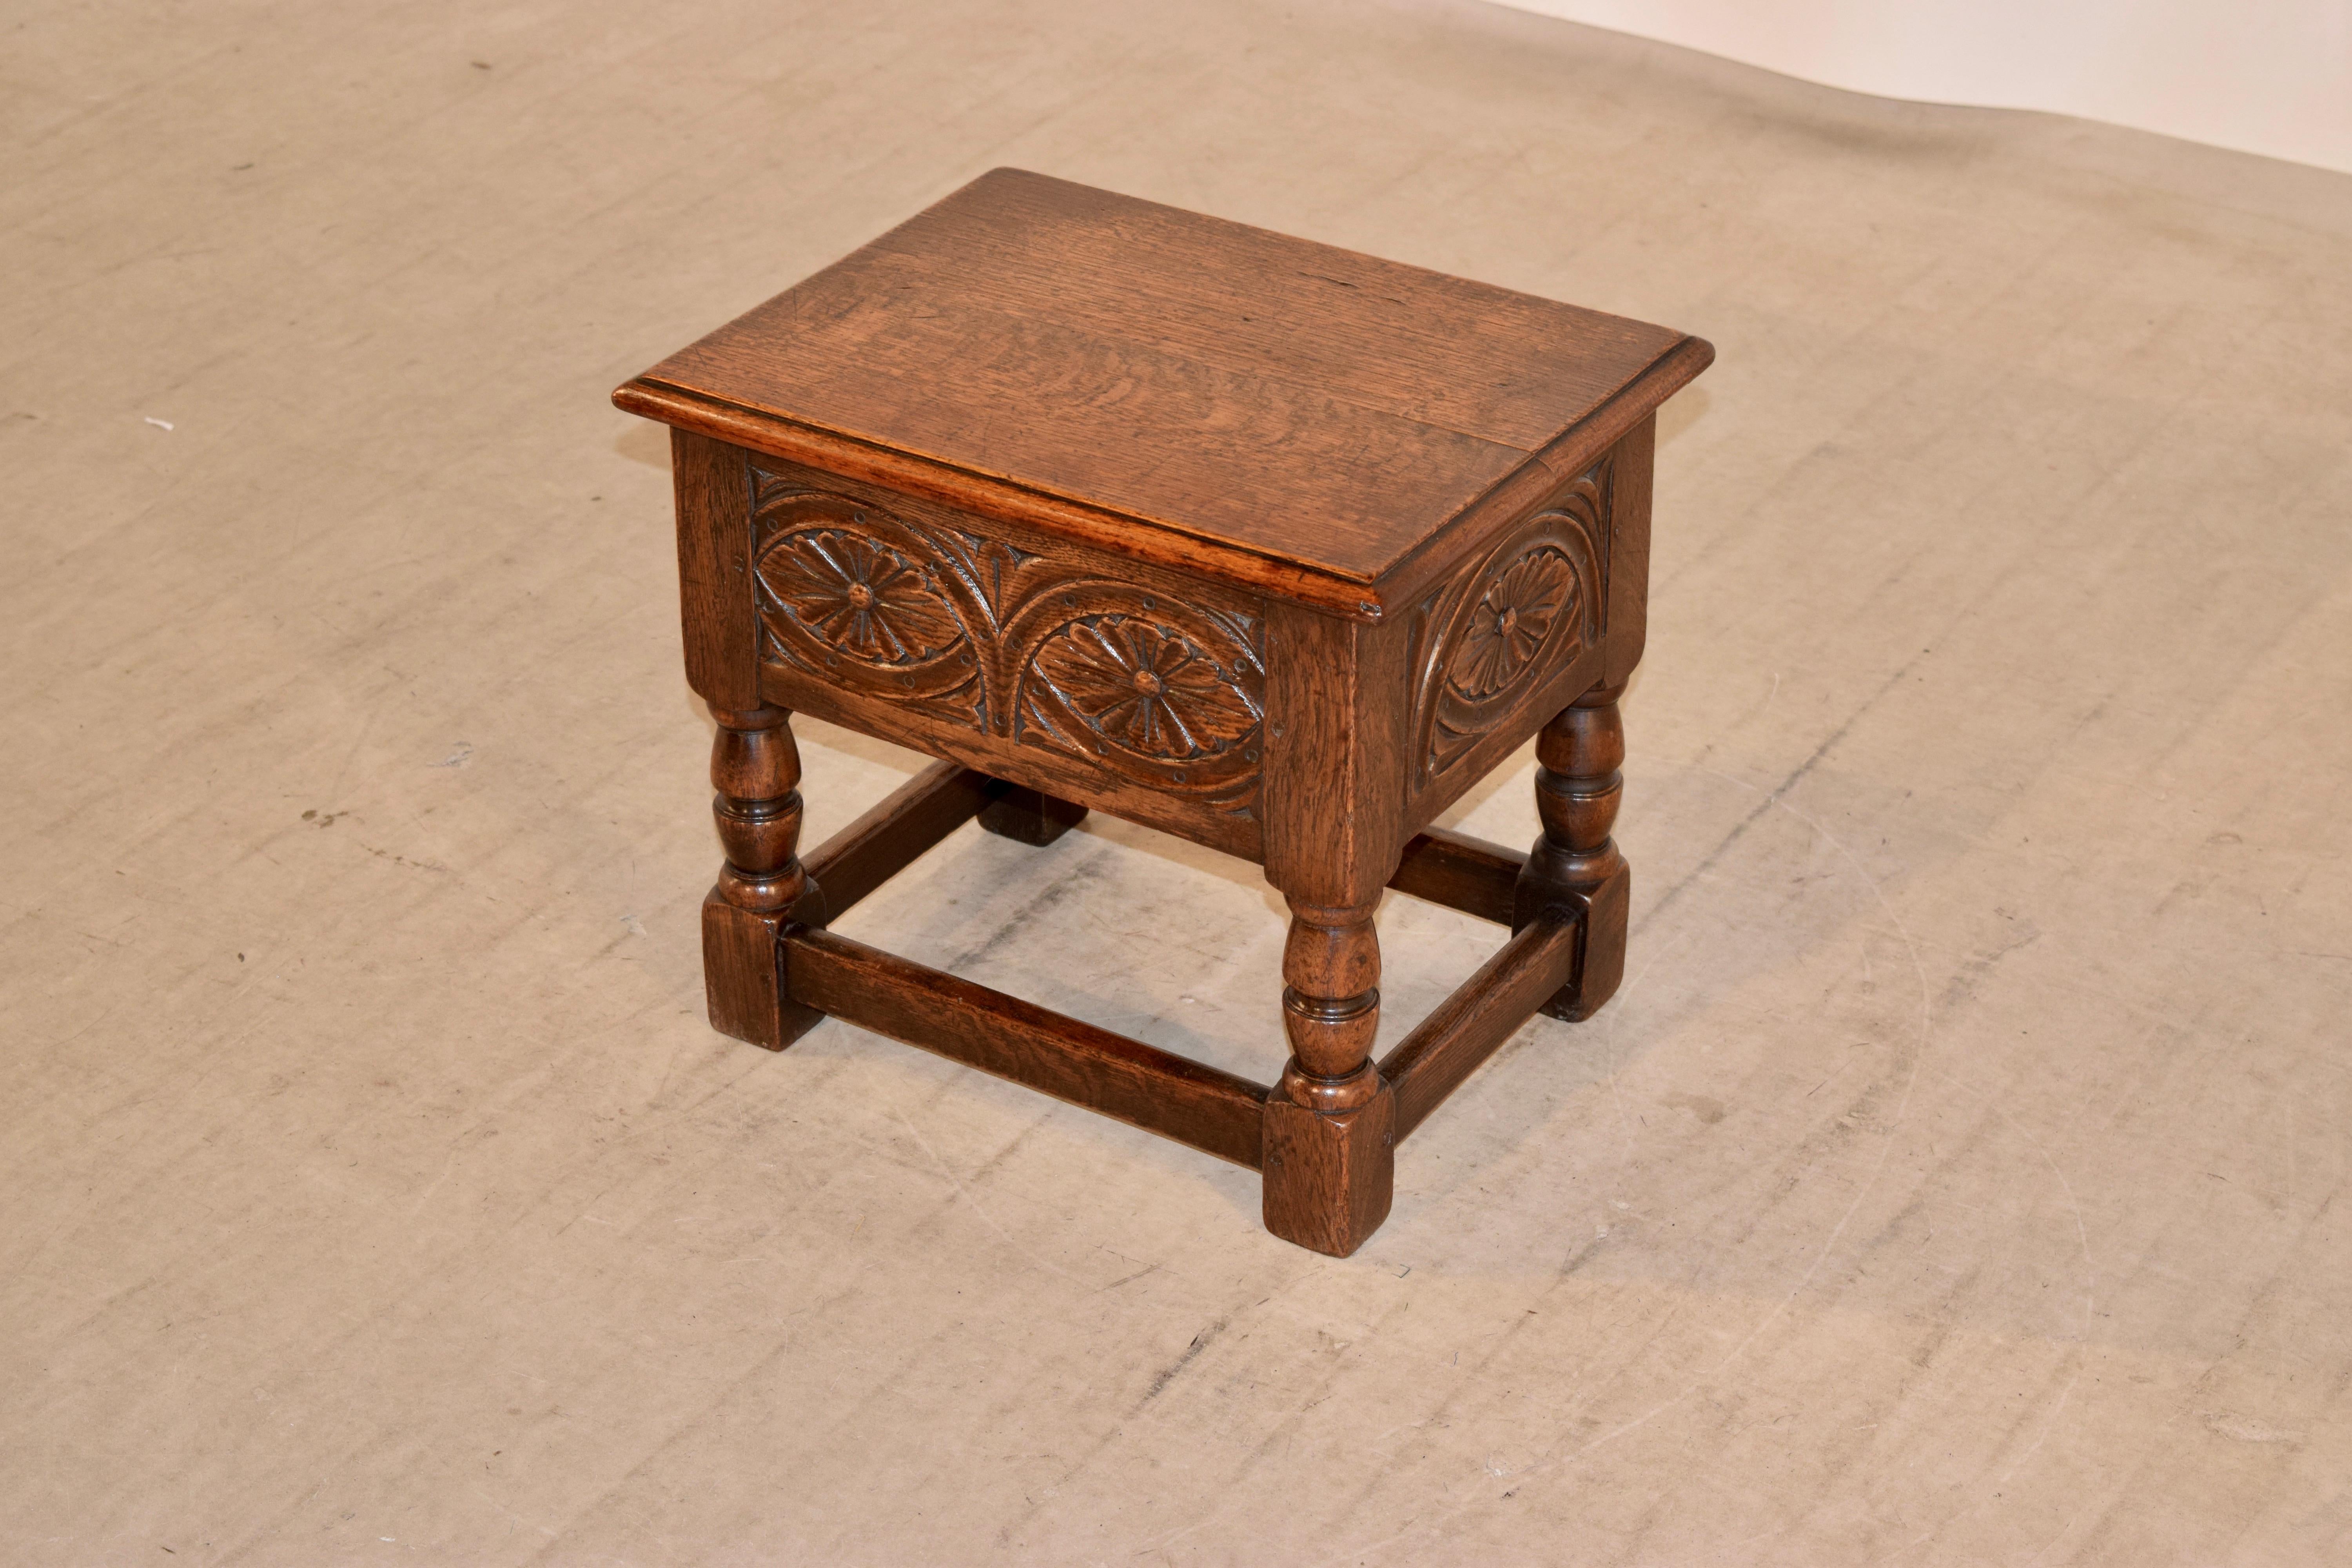 Hand-Carved 19th Century English Lift-Top Stool